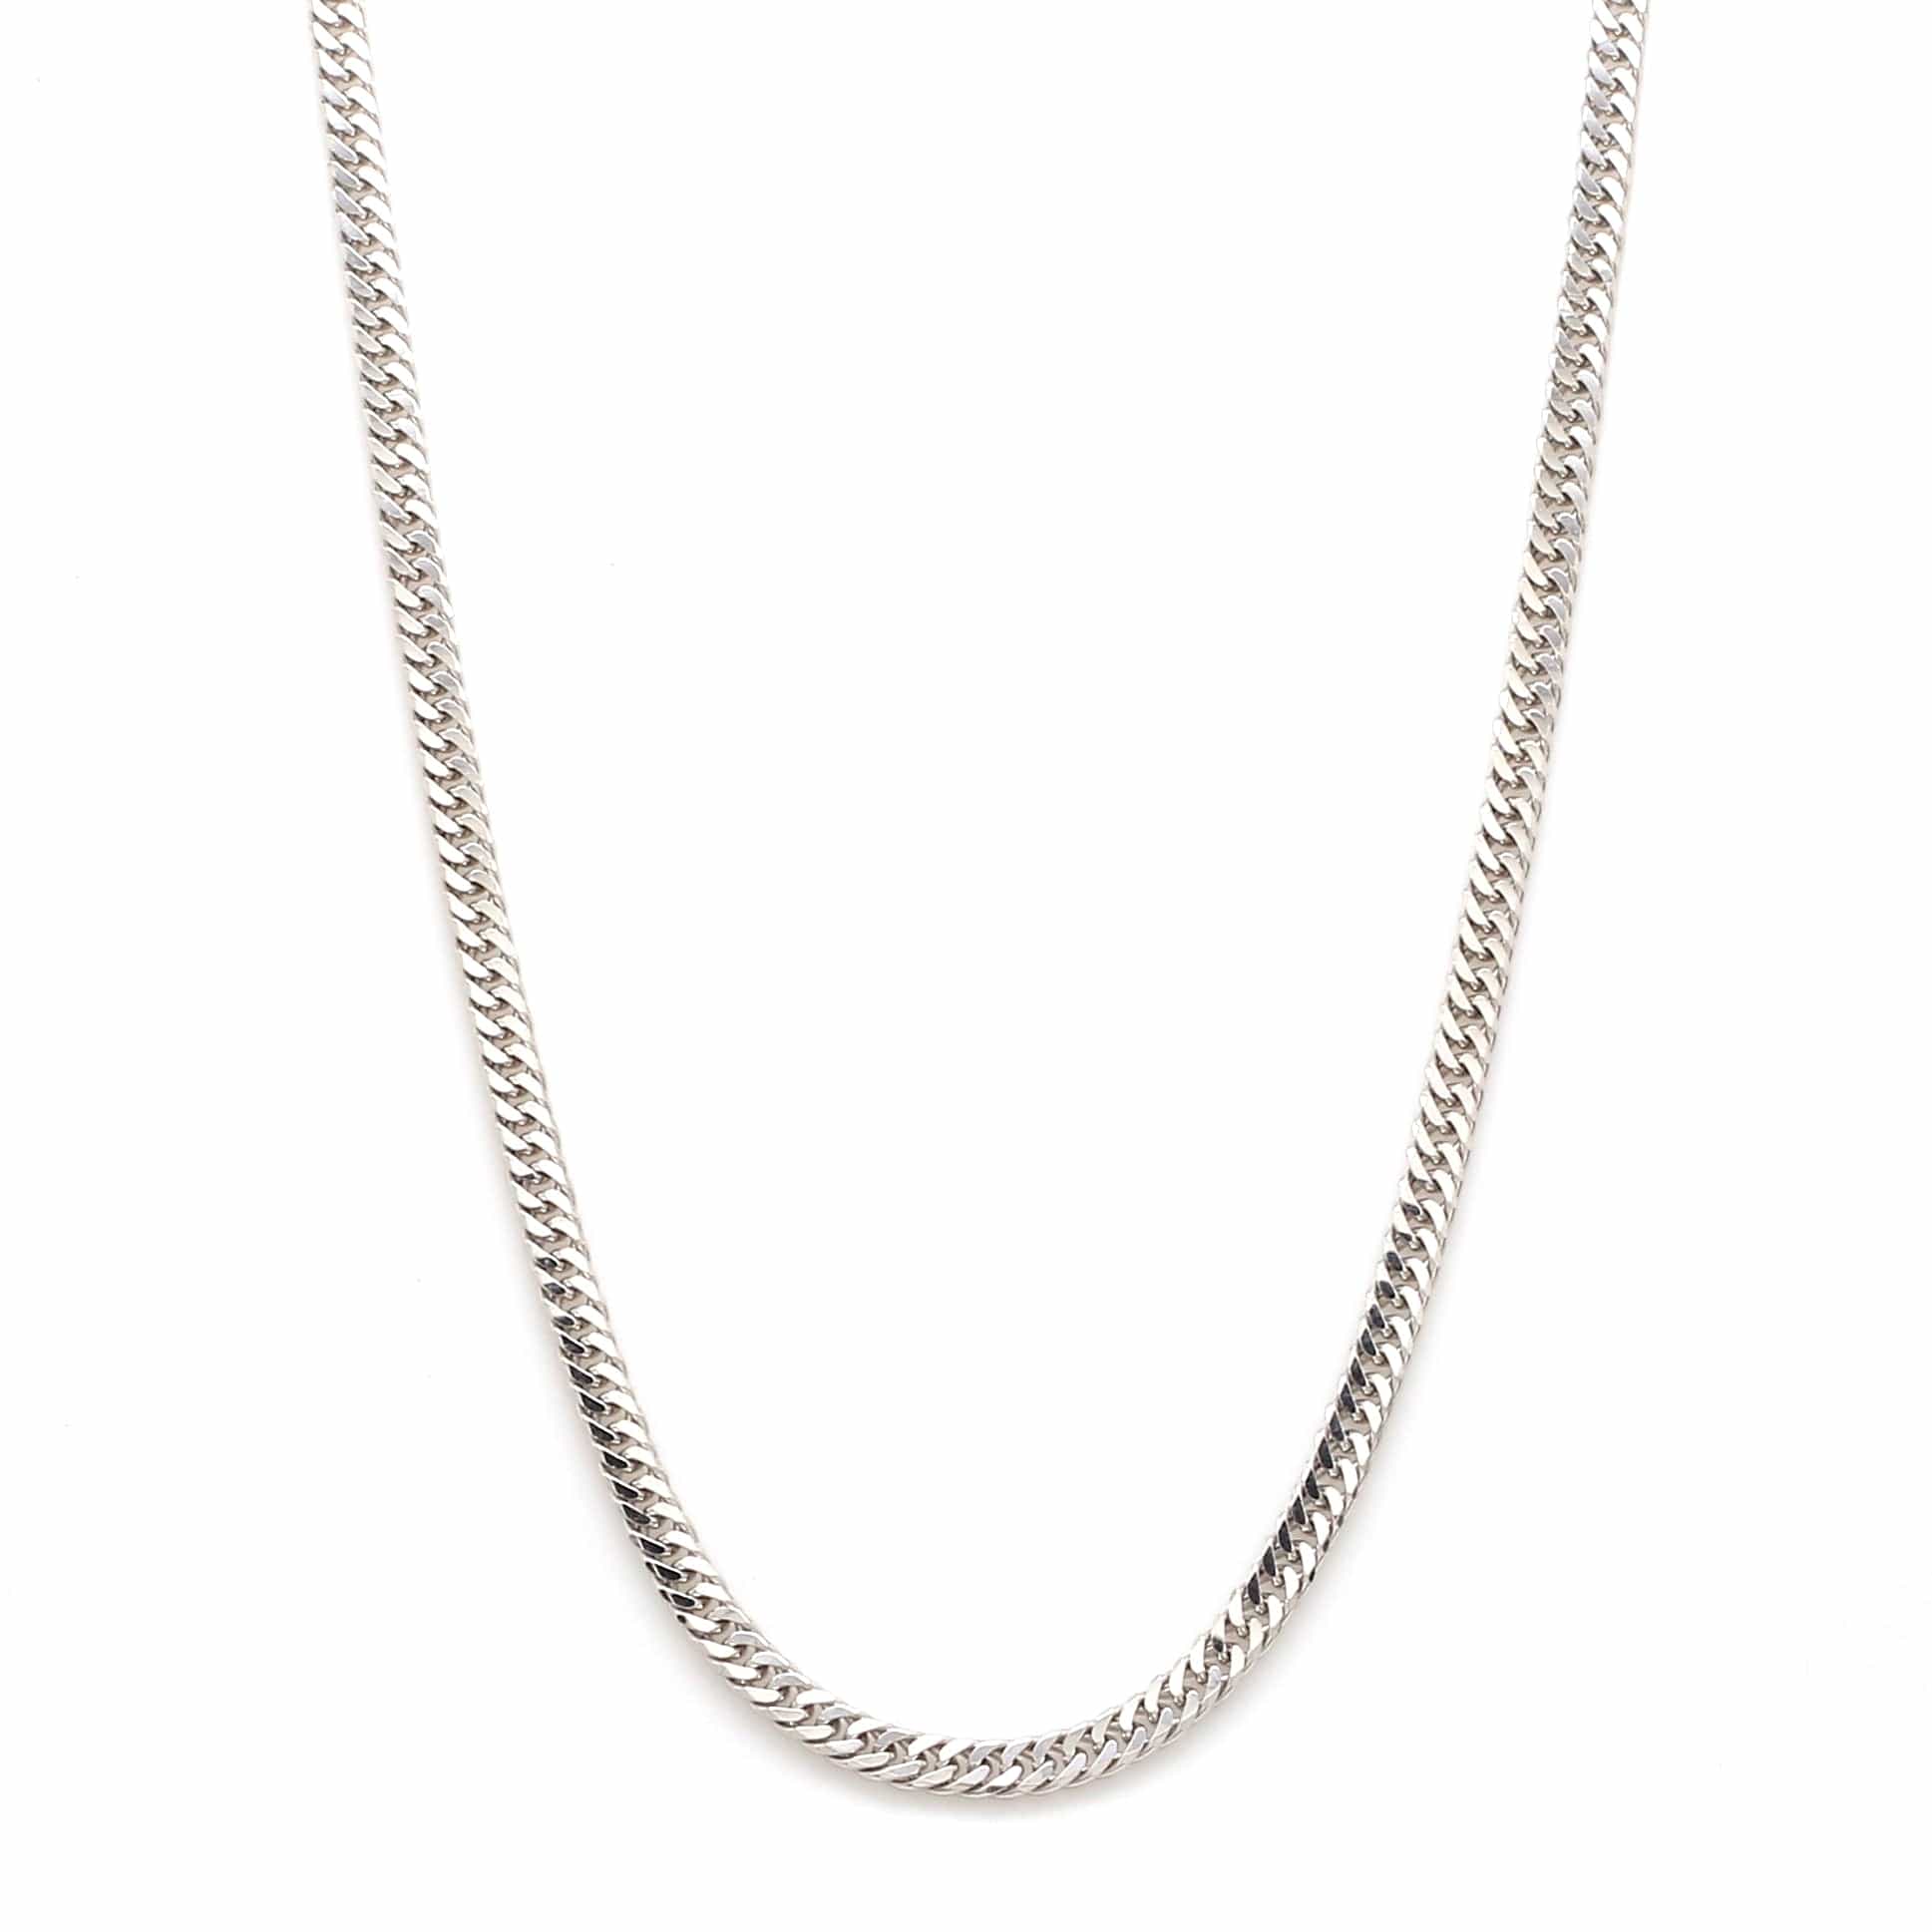 Thin Cuban Link Chain Necklace - The M Jewelers